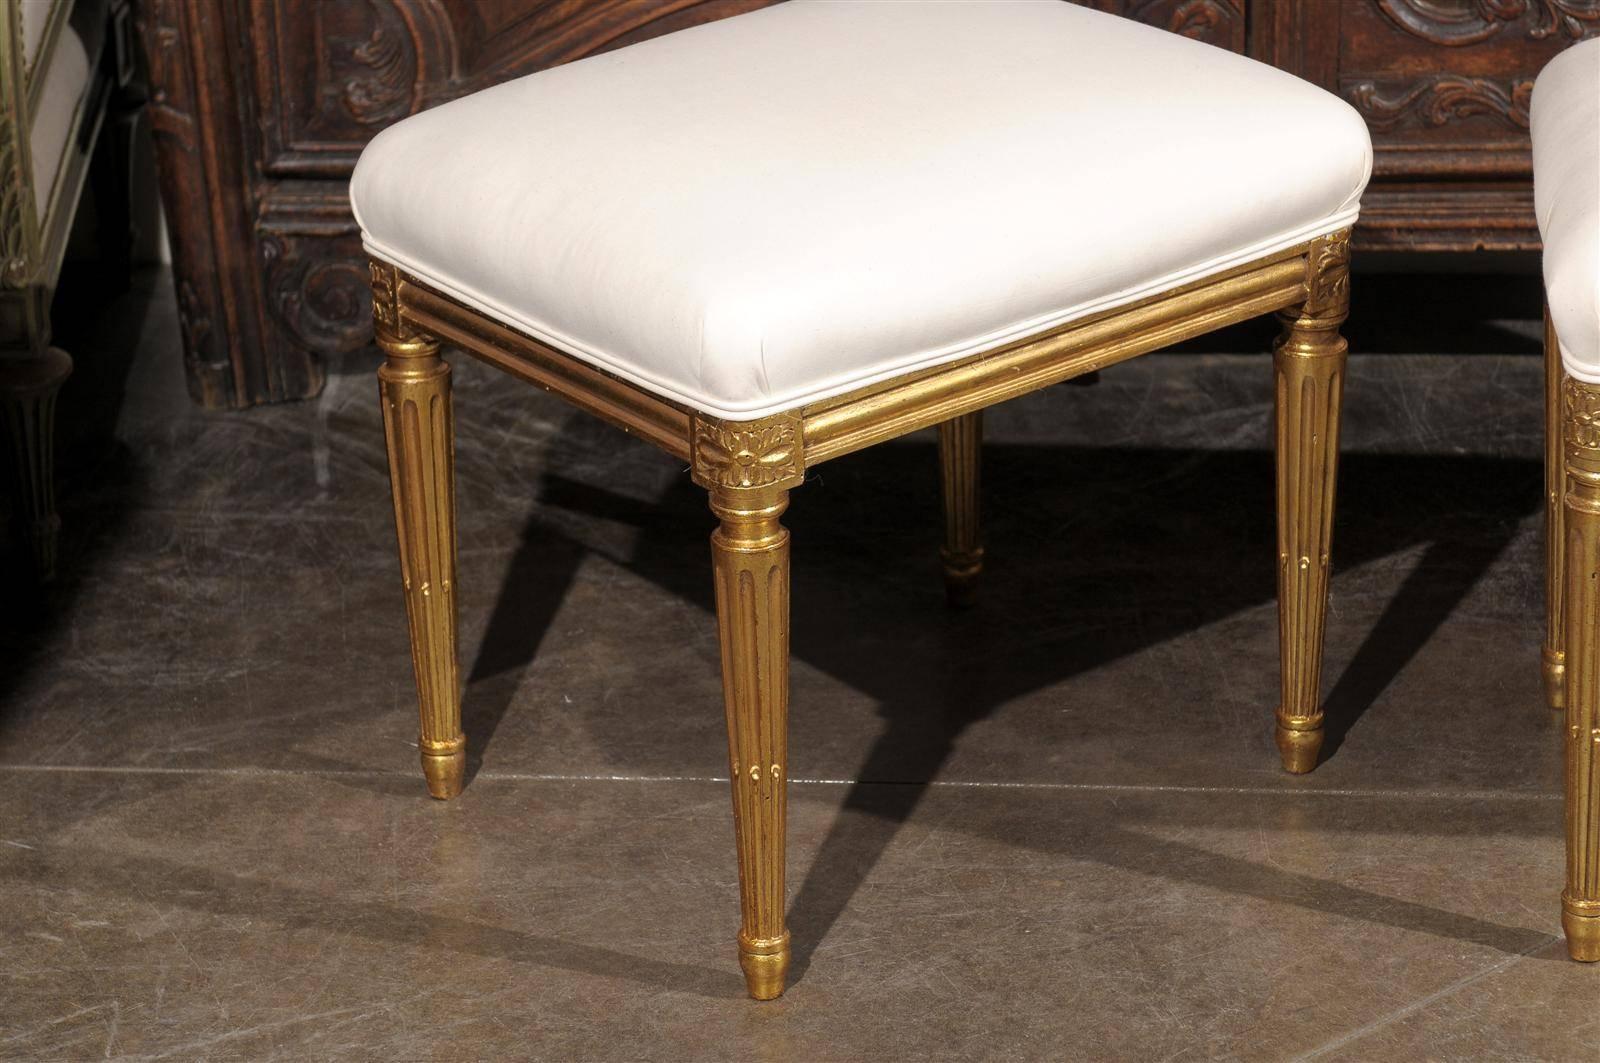 Pair of French Early 20th Century Upholstered Stools with Giltwood Legs For Sale 5